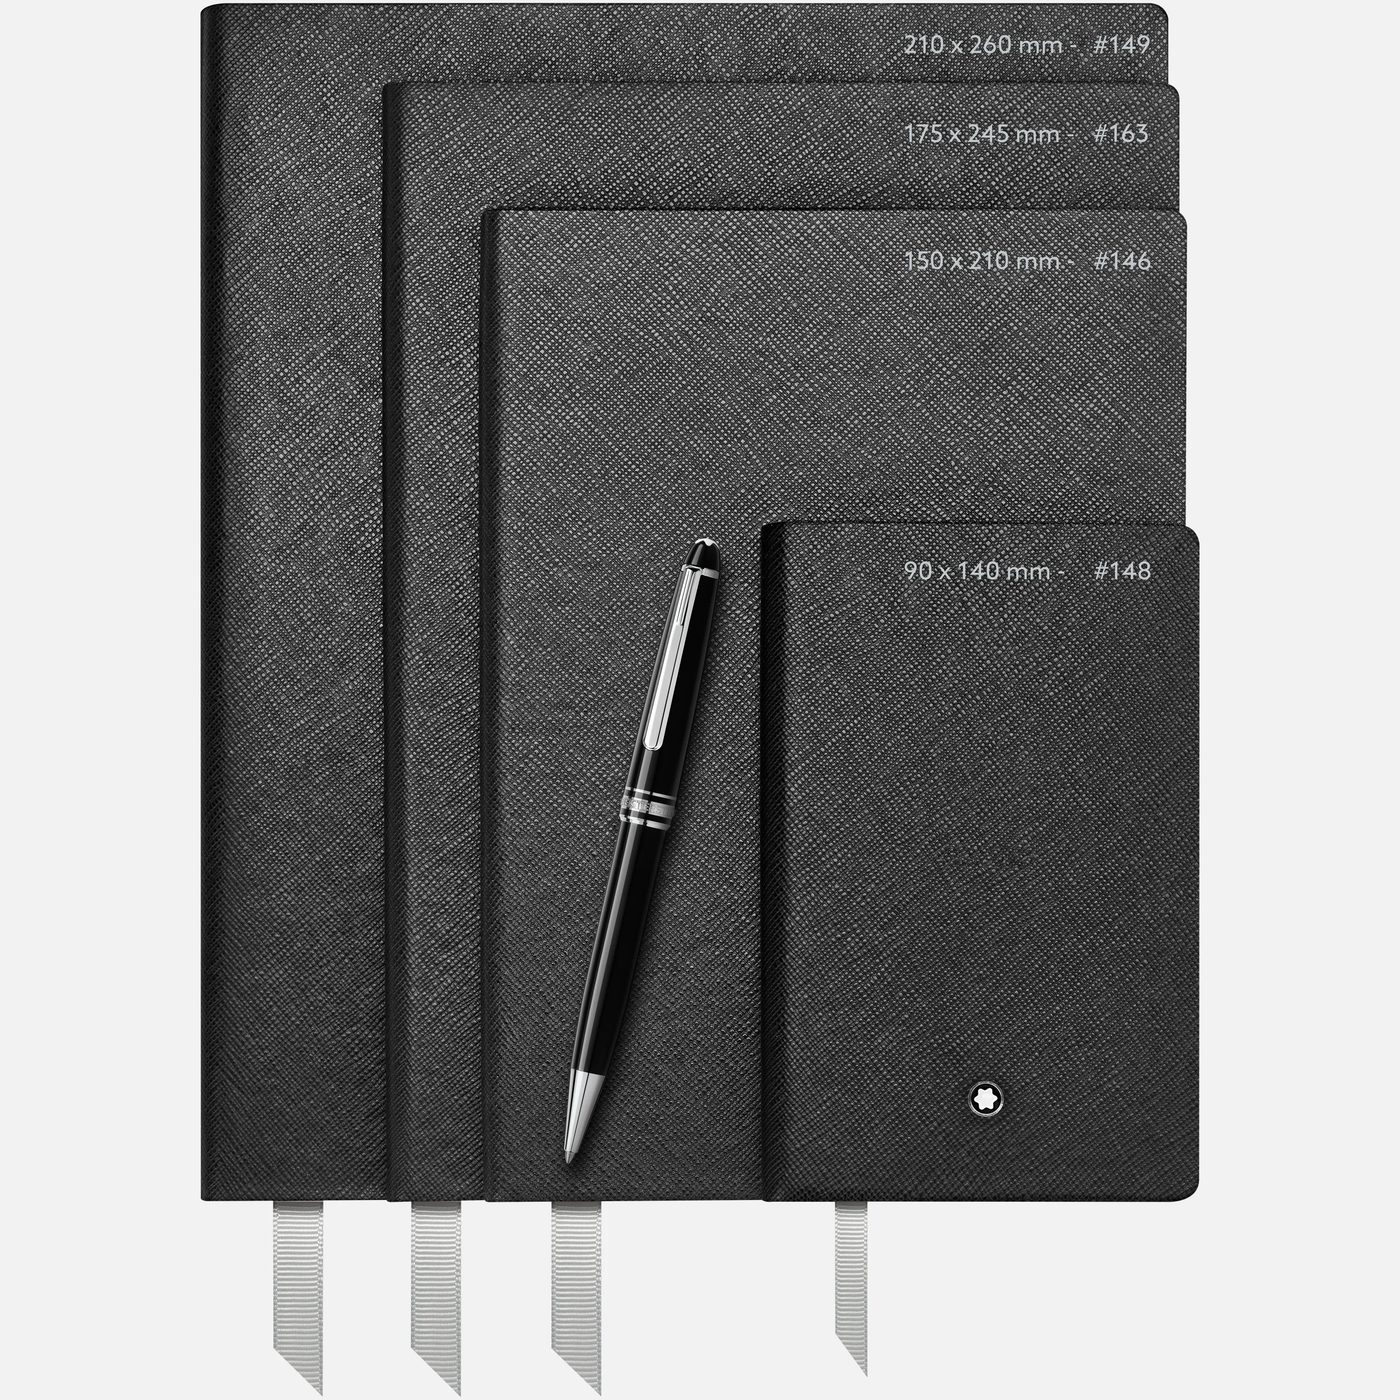 Montblanc Large Notebook Dimensions